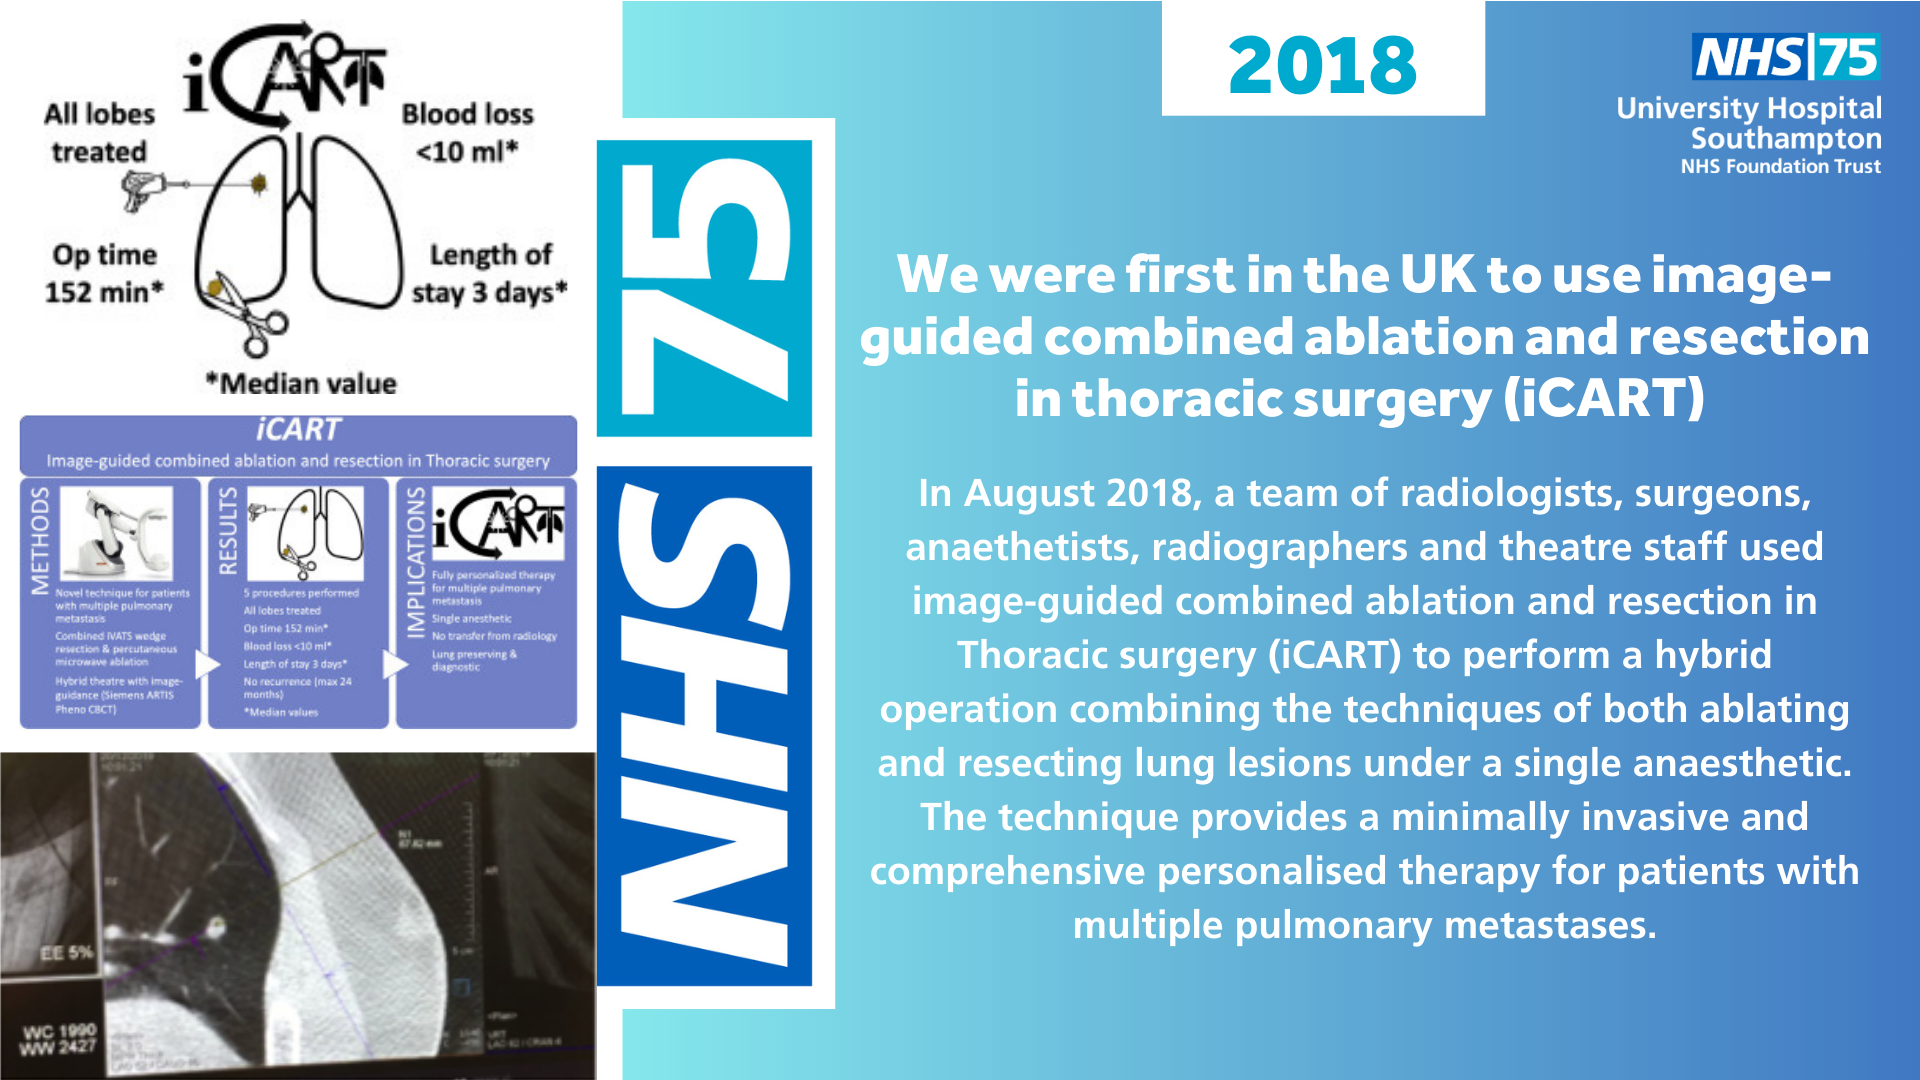 We were first in the UK to use image-guided combined ablation and resection in thoracic surgery (iCART)